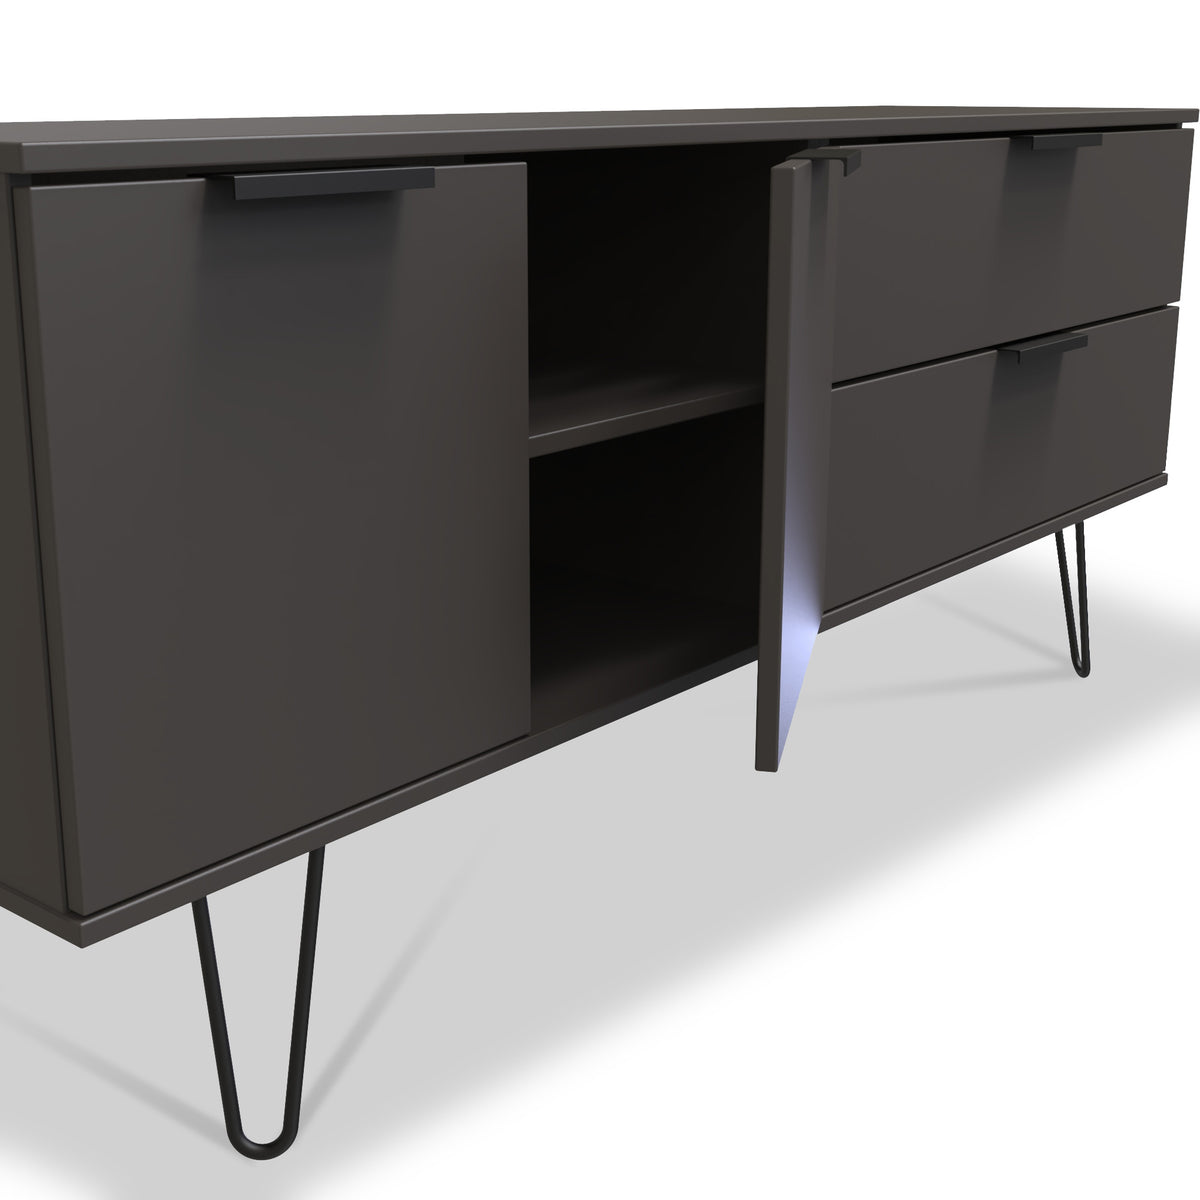 Moreno Graphite Grey 2 Door 2 Drawer Sideboard Cabinet with hairpin legs from Roseland Furniture